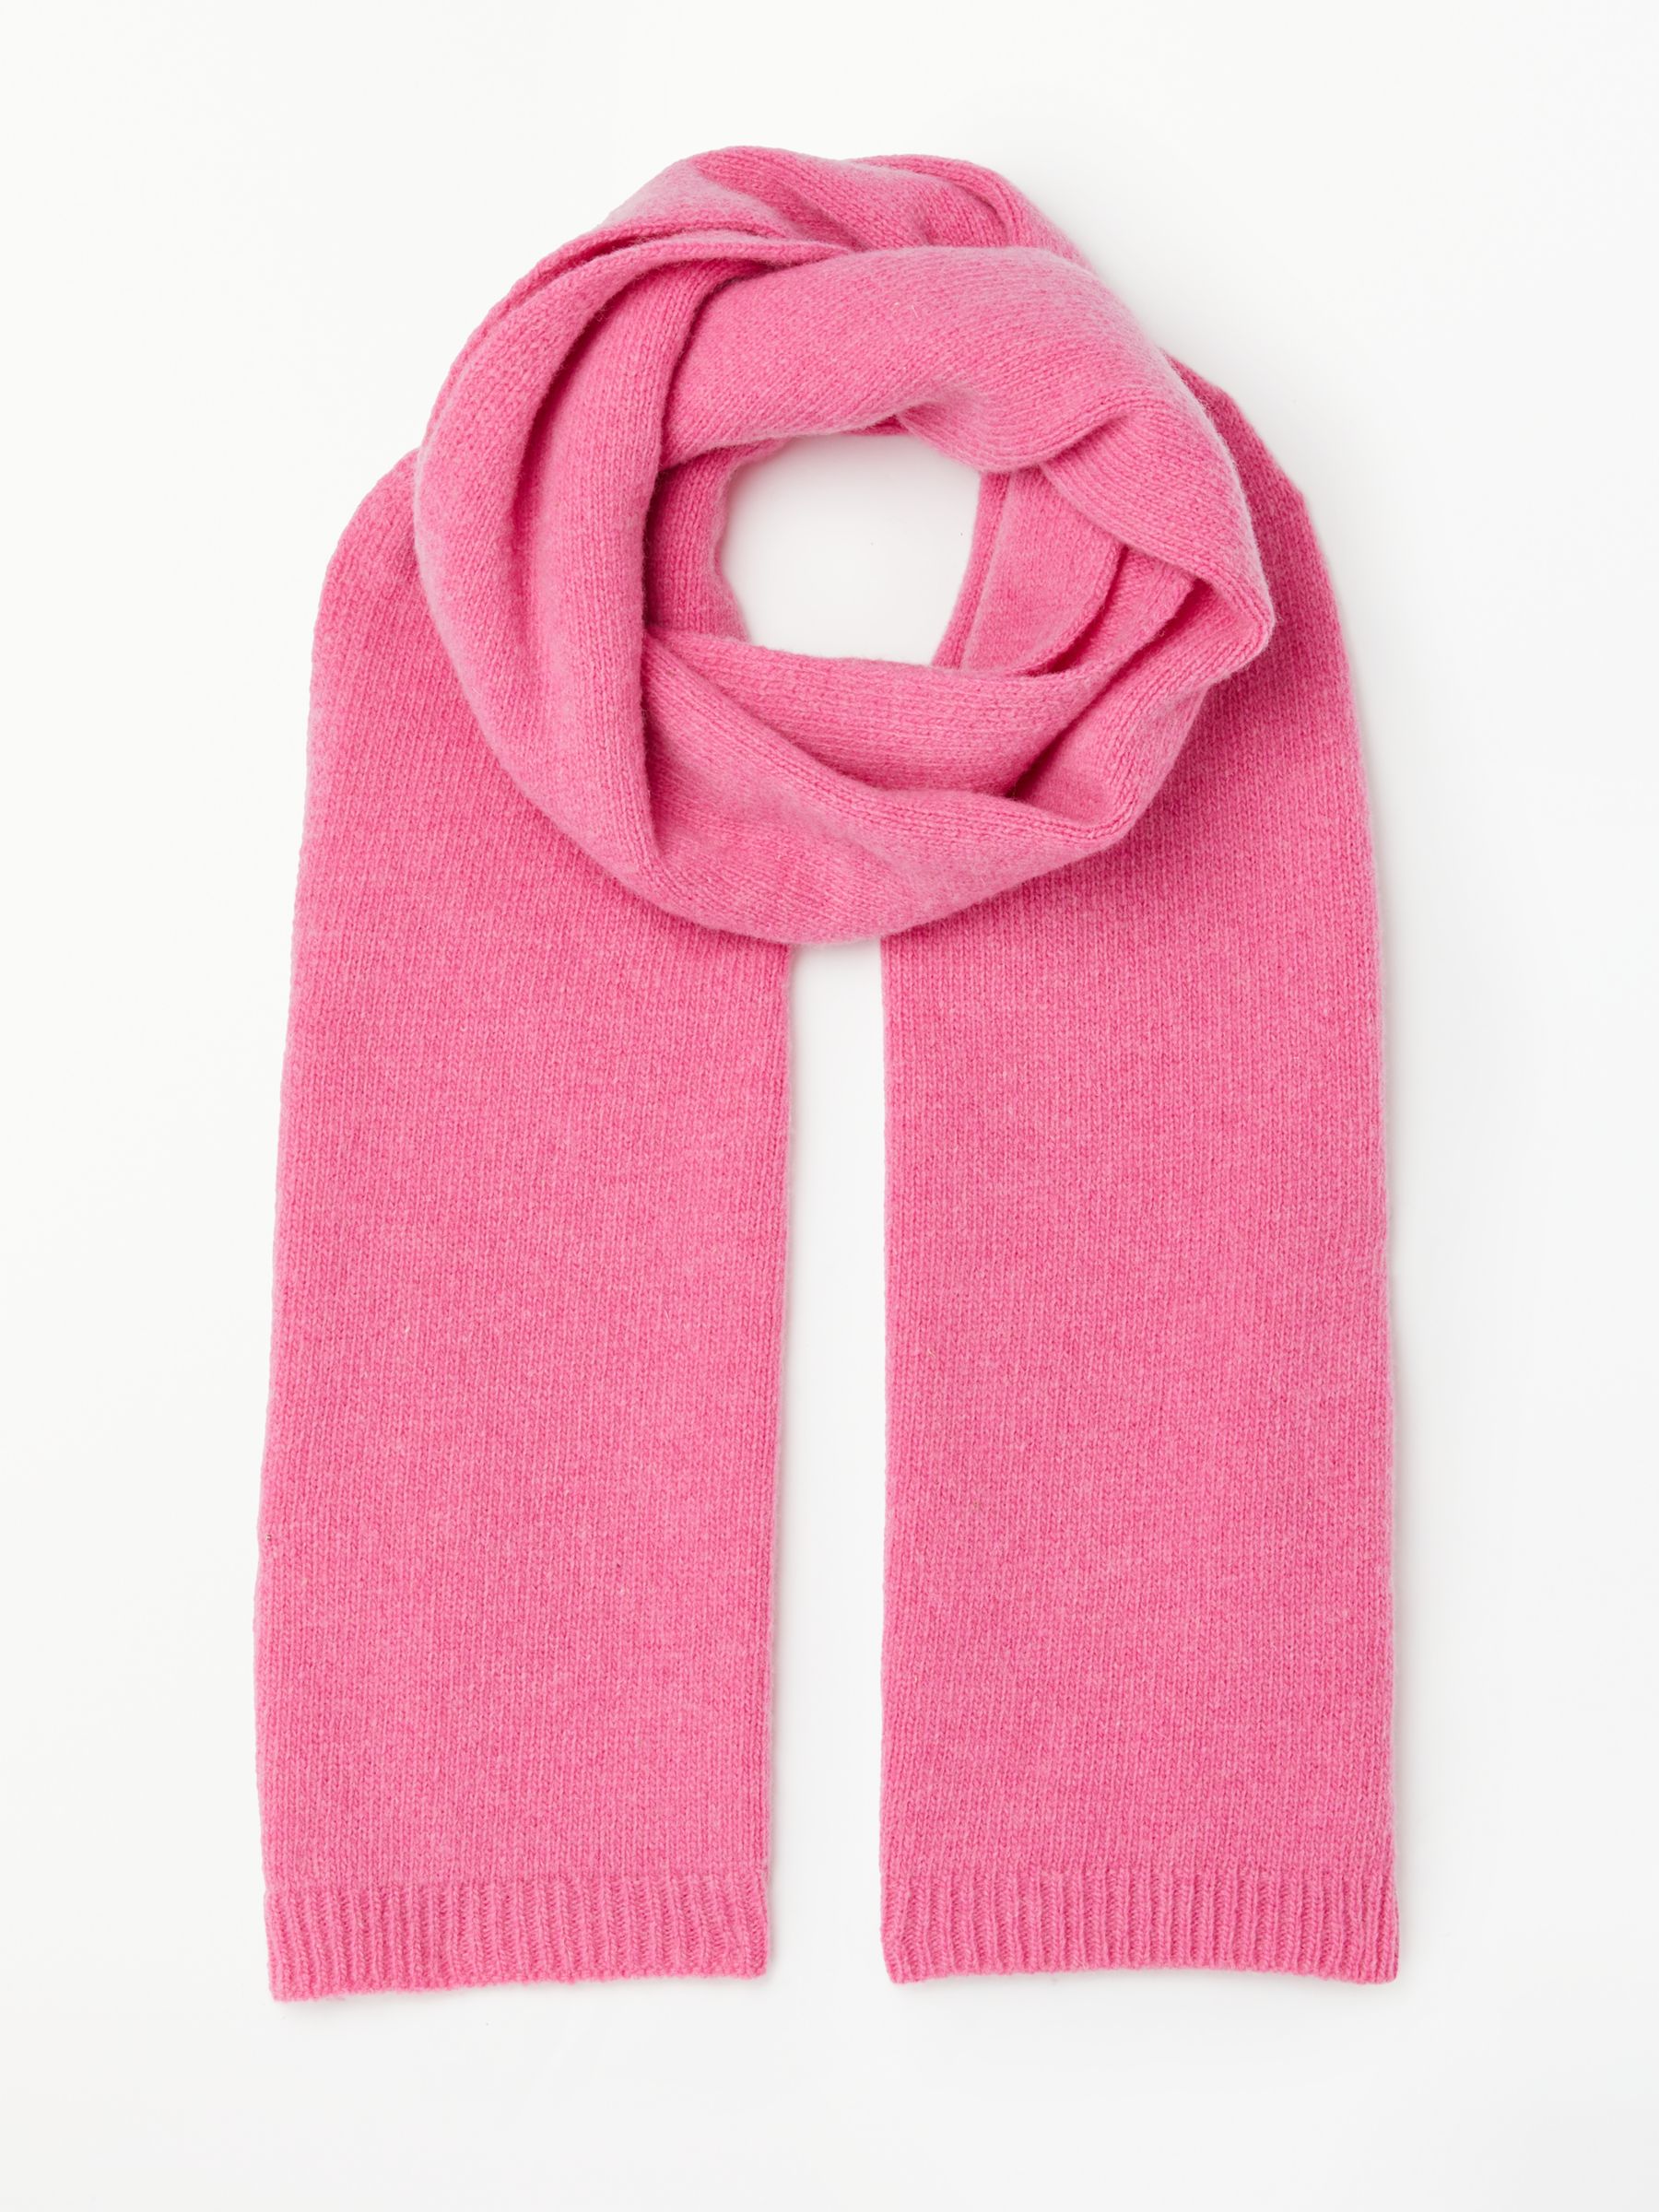 John Lewis & Partners Cashmere Scarf, Bright Pink